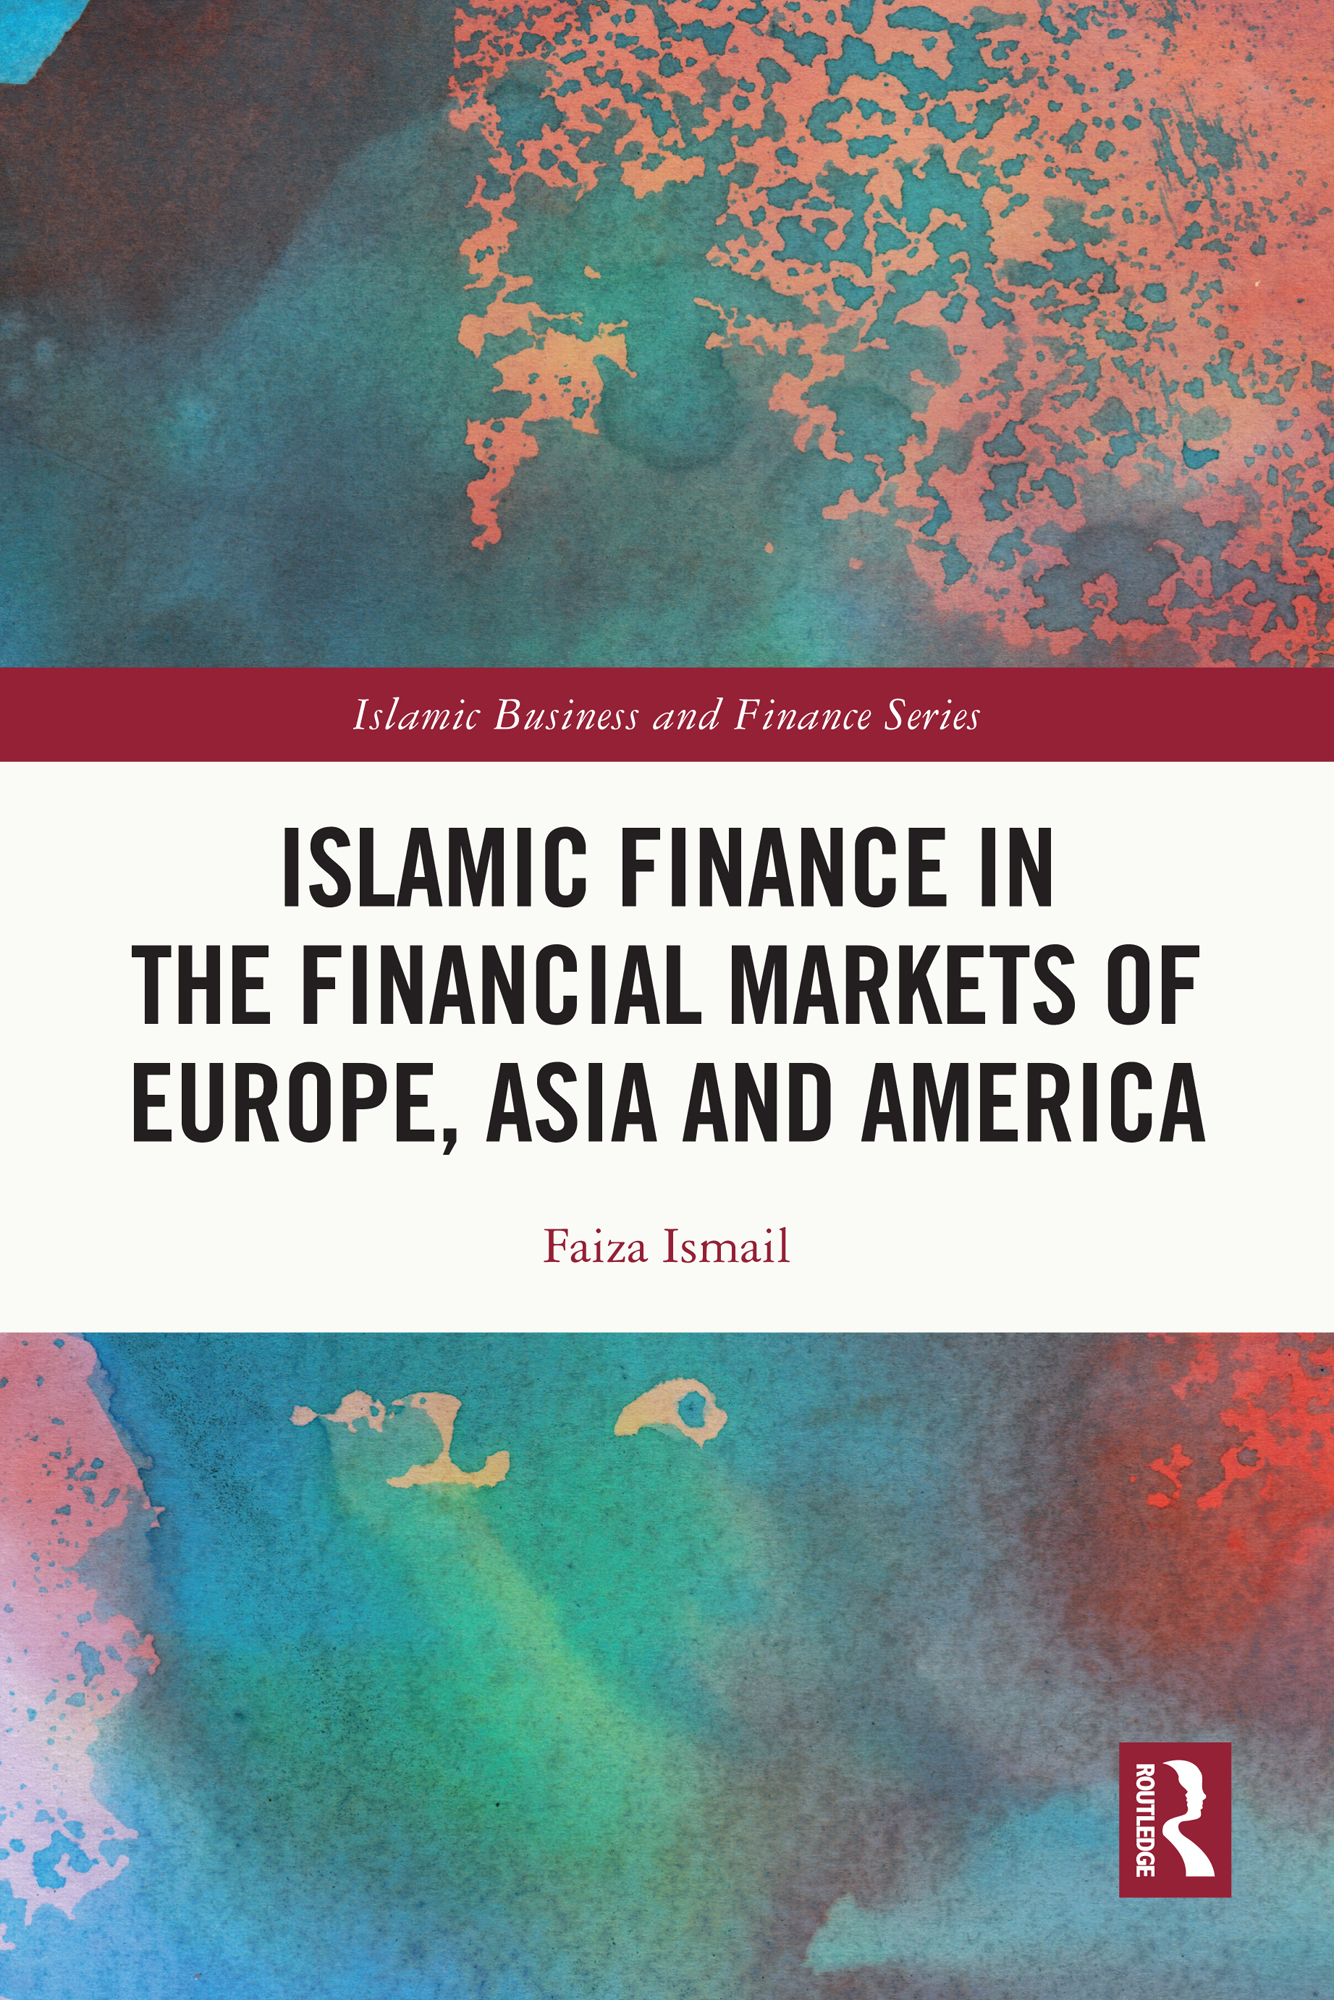 Islamic Finance in the Financial Markets of Europe, Asia and America